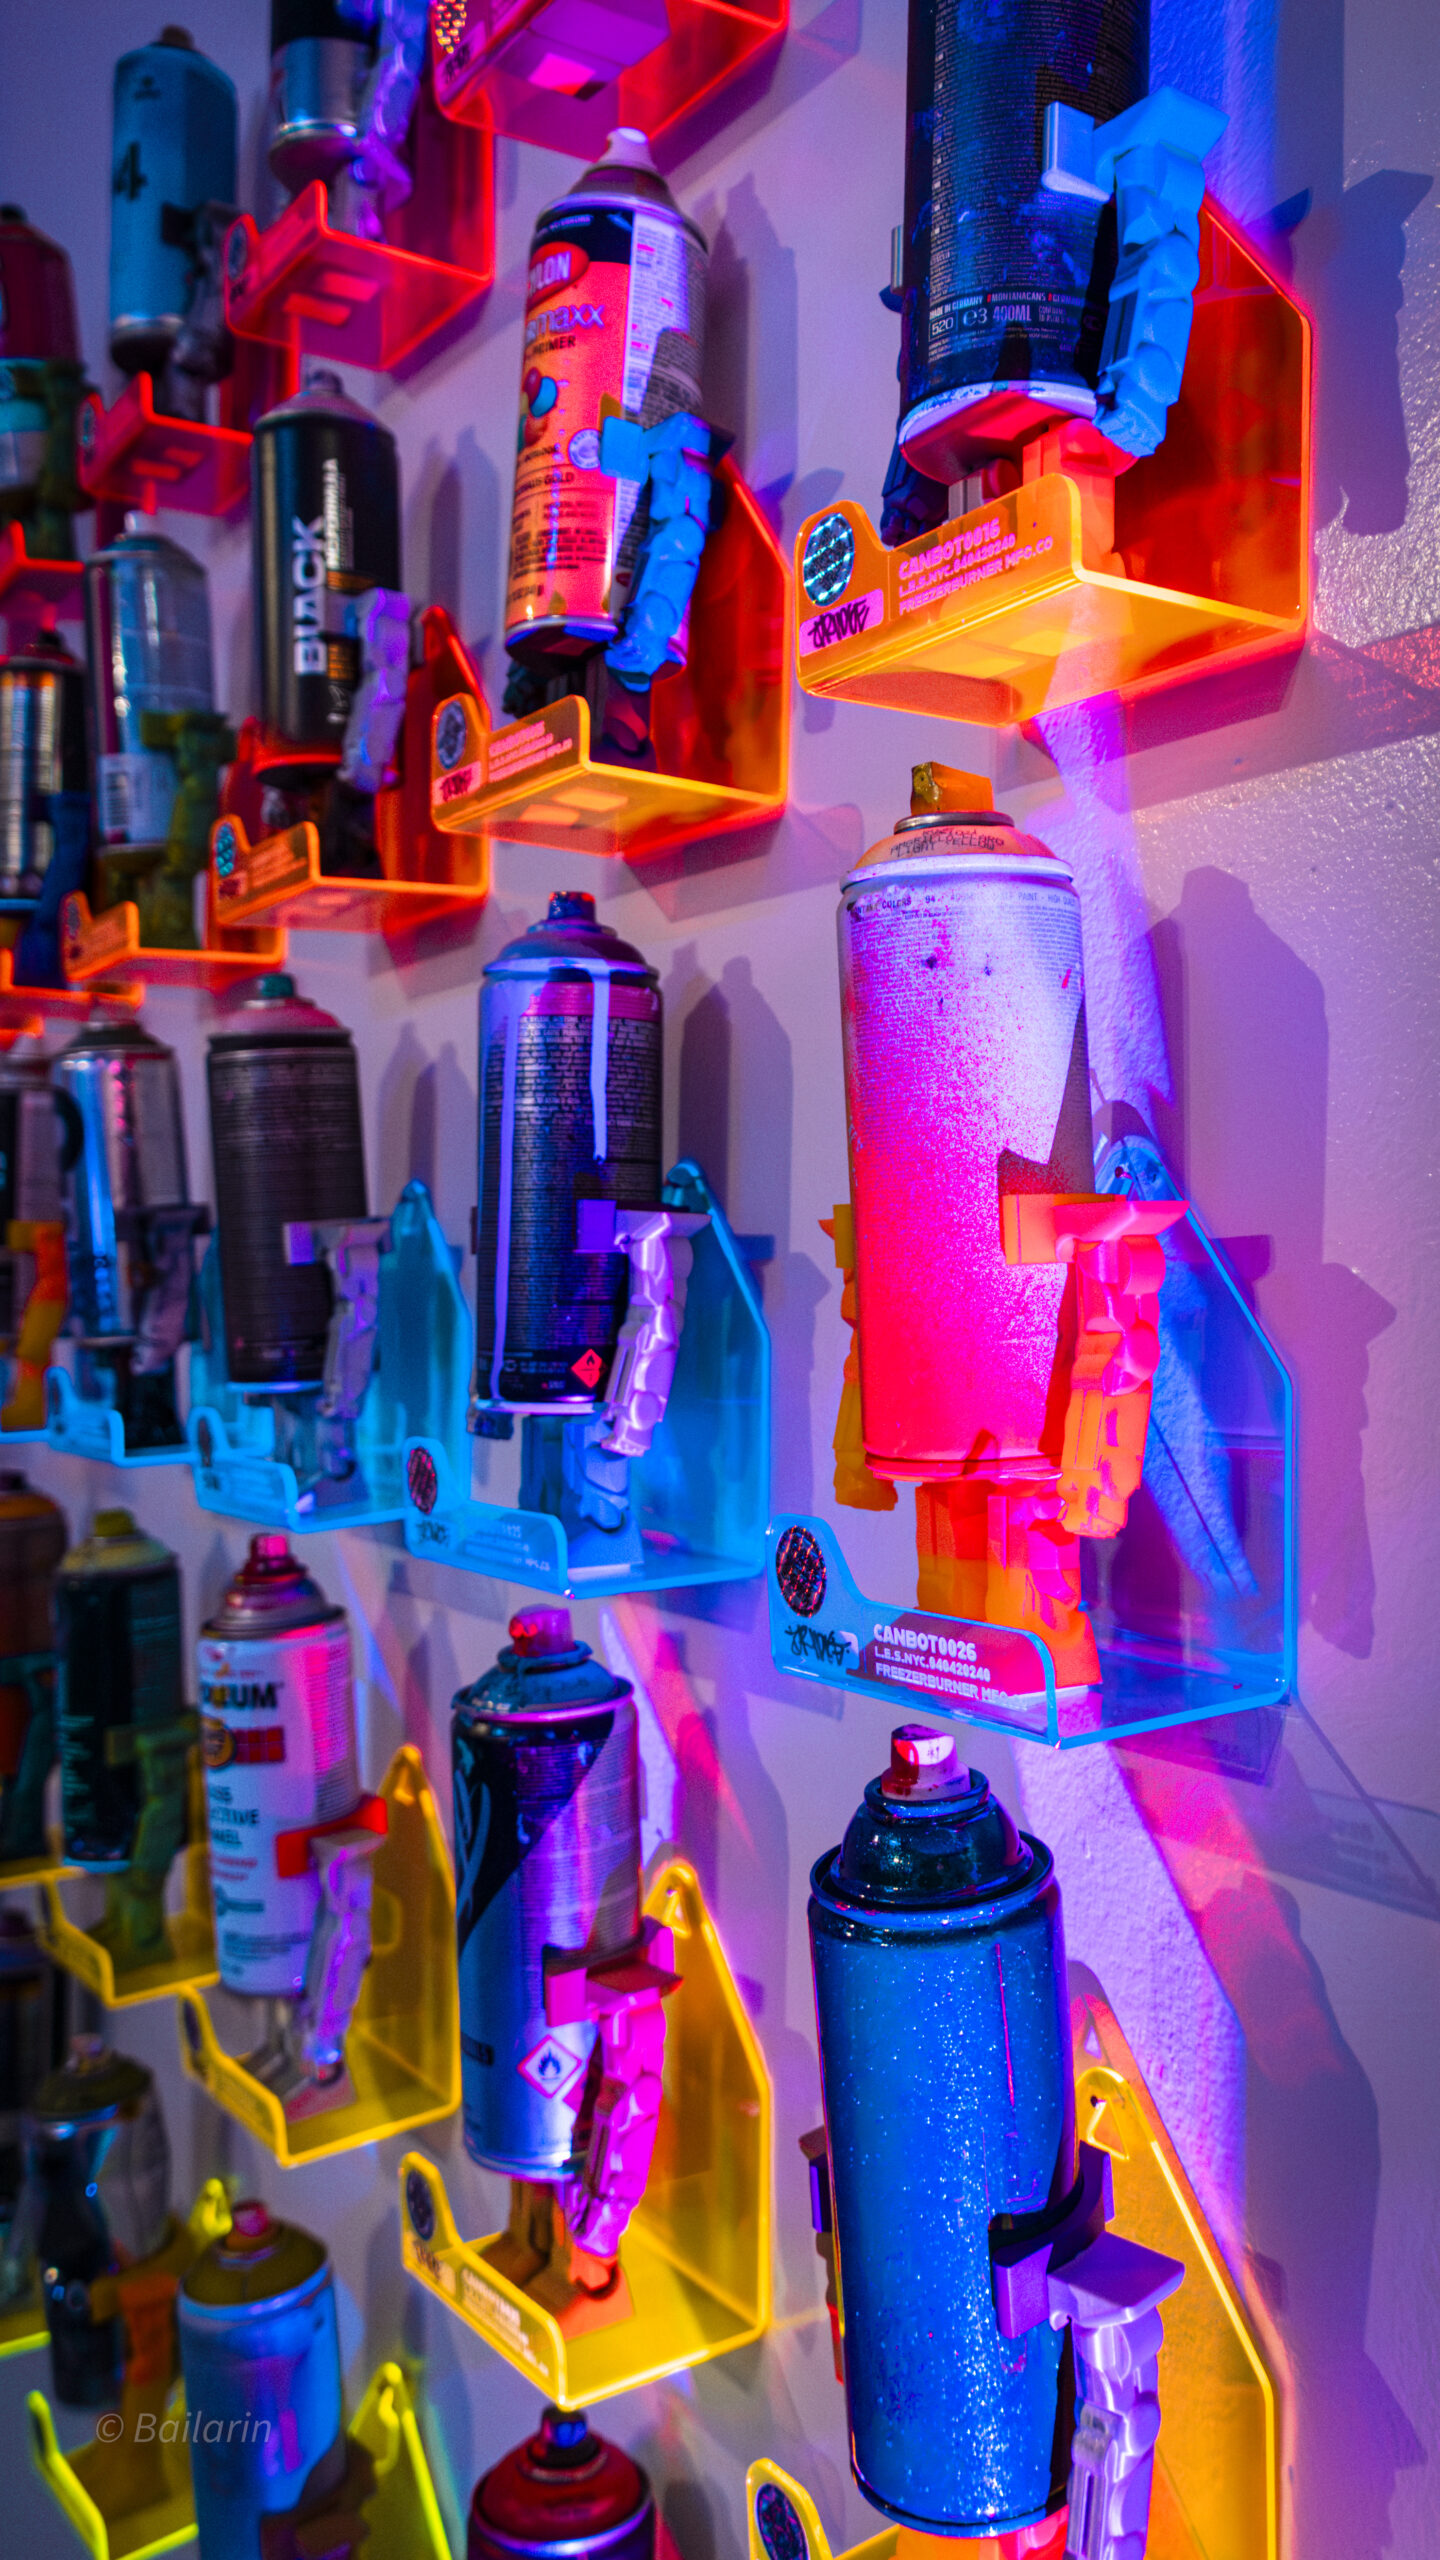 Spray cans with arms and legs attached to it on plexiglass shelves